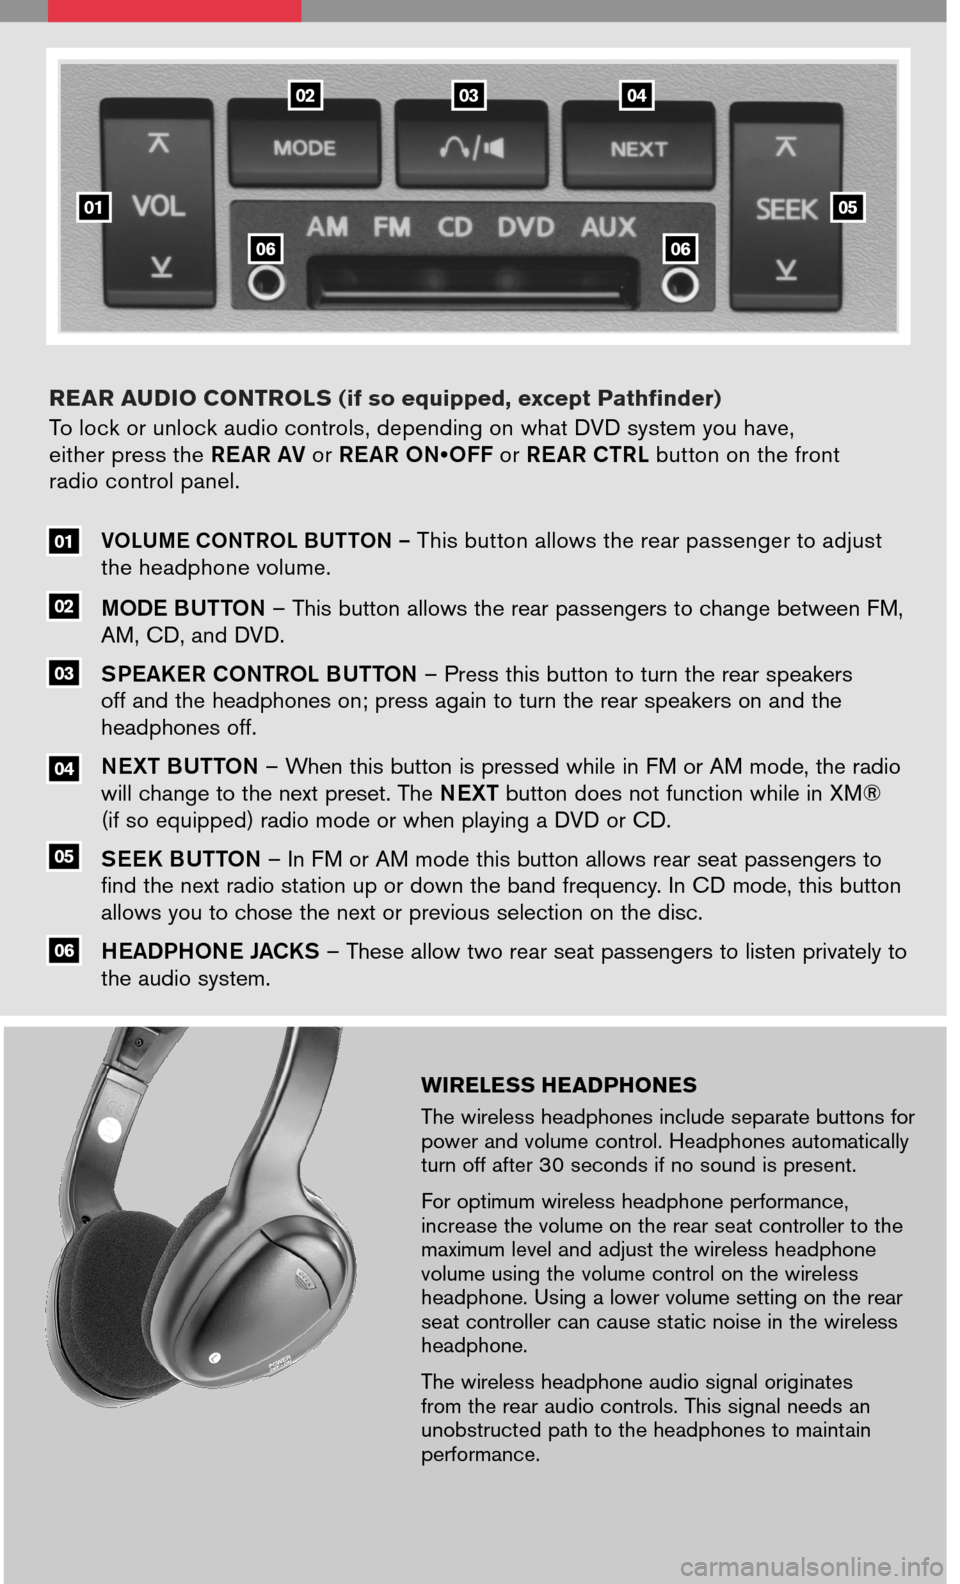 NISSAN VERSA 2008 1.G Entertainment Syst 
WIRELESS HEADPHONES
The wireless headphones include separate buttons for power and volume control. Headphones automatically turn off after 30 seconds if no sound is present.
For optimum wireless head